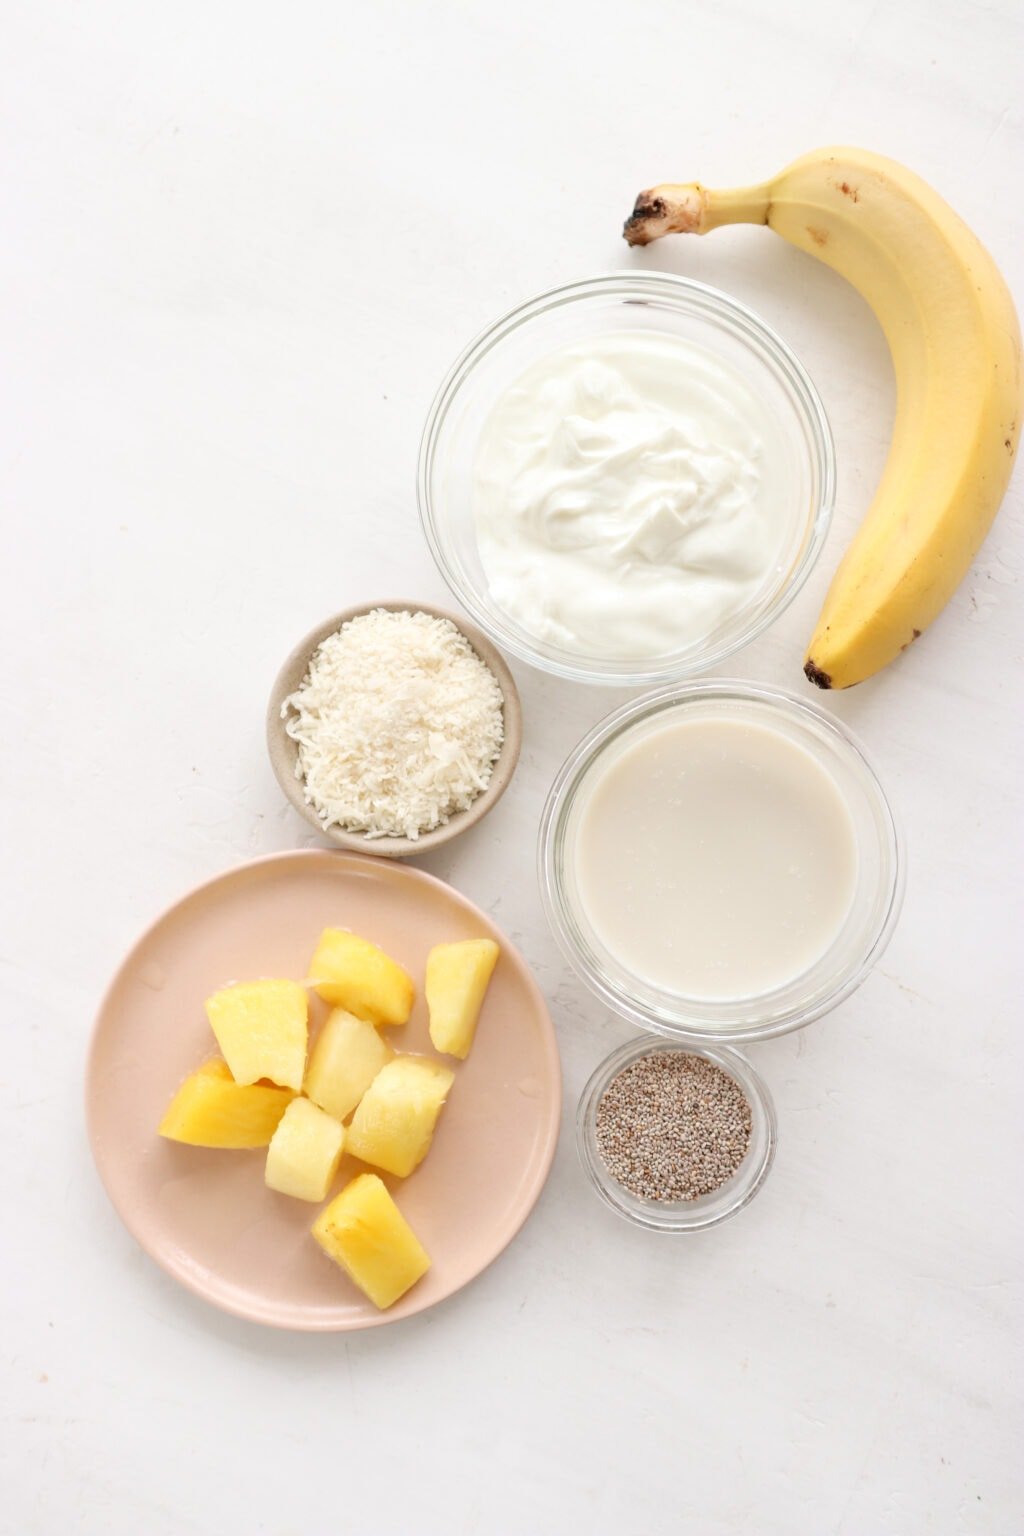 Recipe ingredients laid out on a counter including a banana, greek yogurt, coconut, coconut milk, chia seeds, and pineapple.